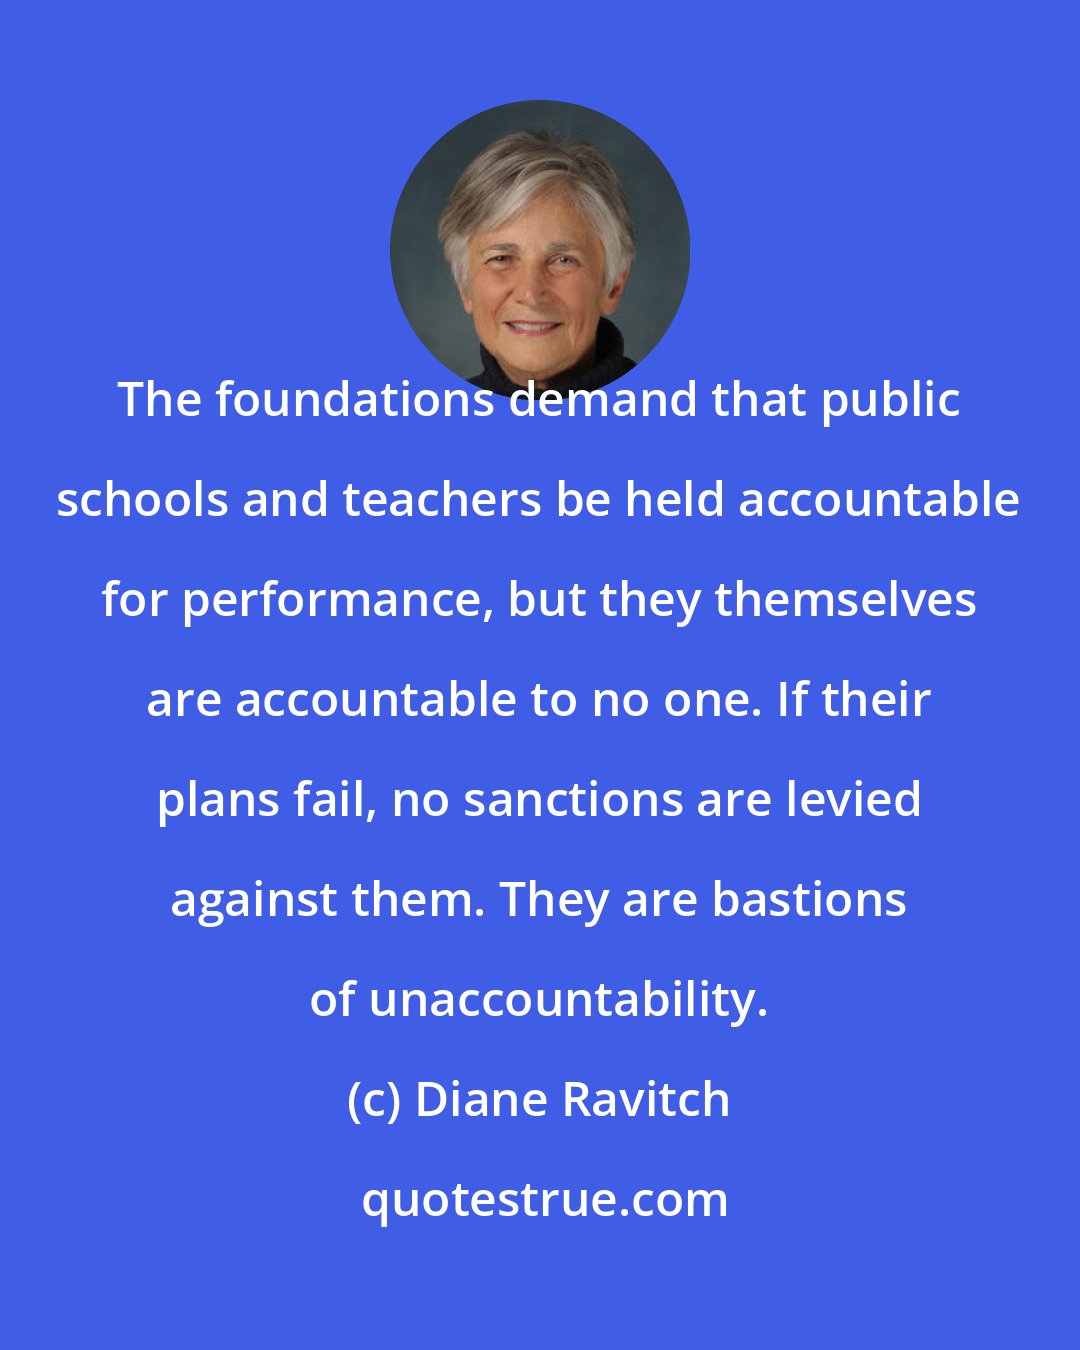 Diane Ravitch: The foundations demand that public schools and teachers be held accountable for performance, but they themselves are accountable to no one. If their plans fail, no sanctions are levied against them. They are bastions of unaccountability.